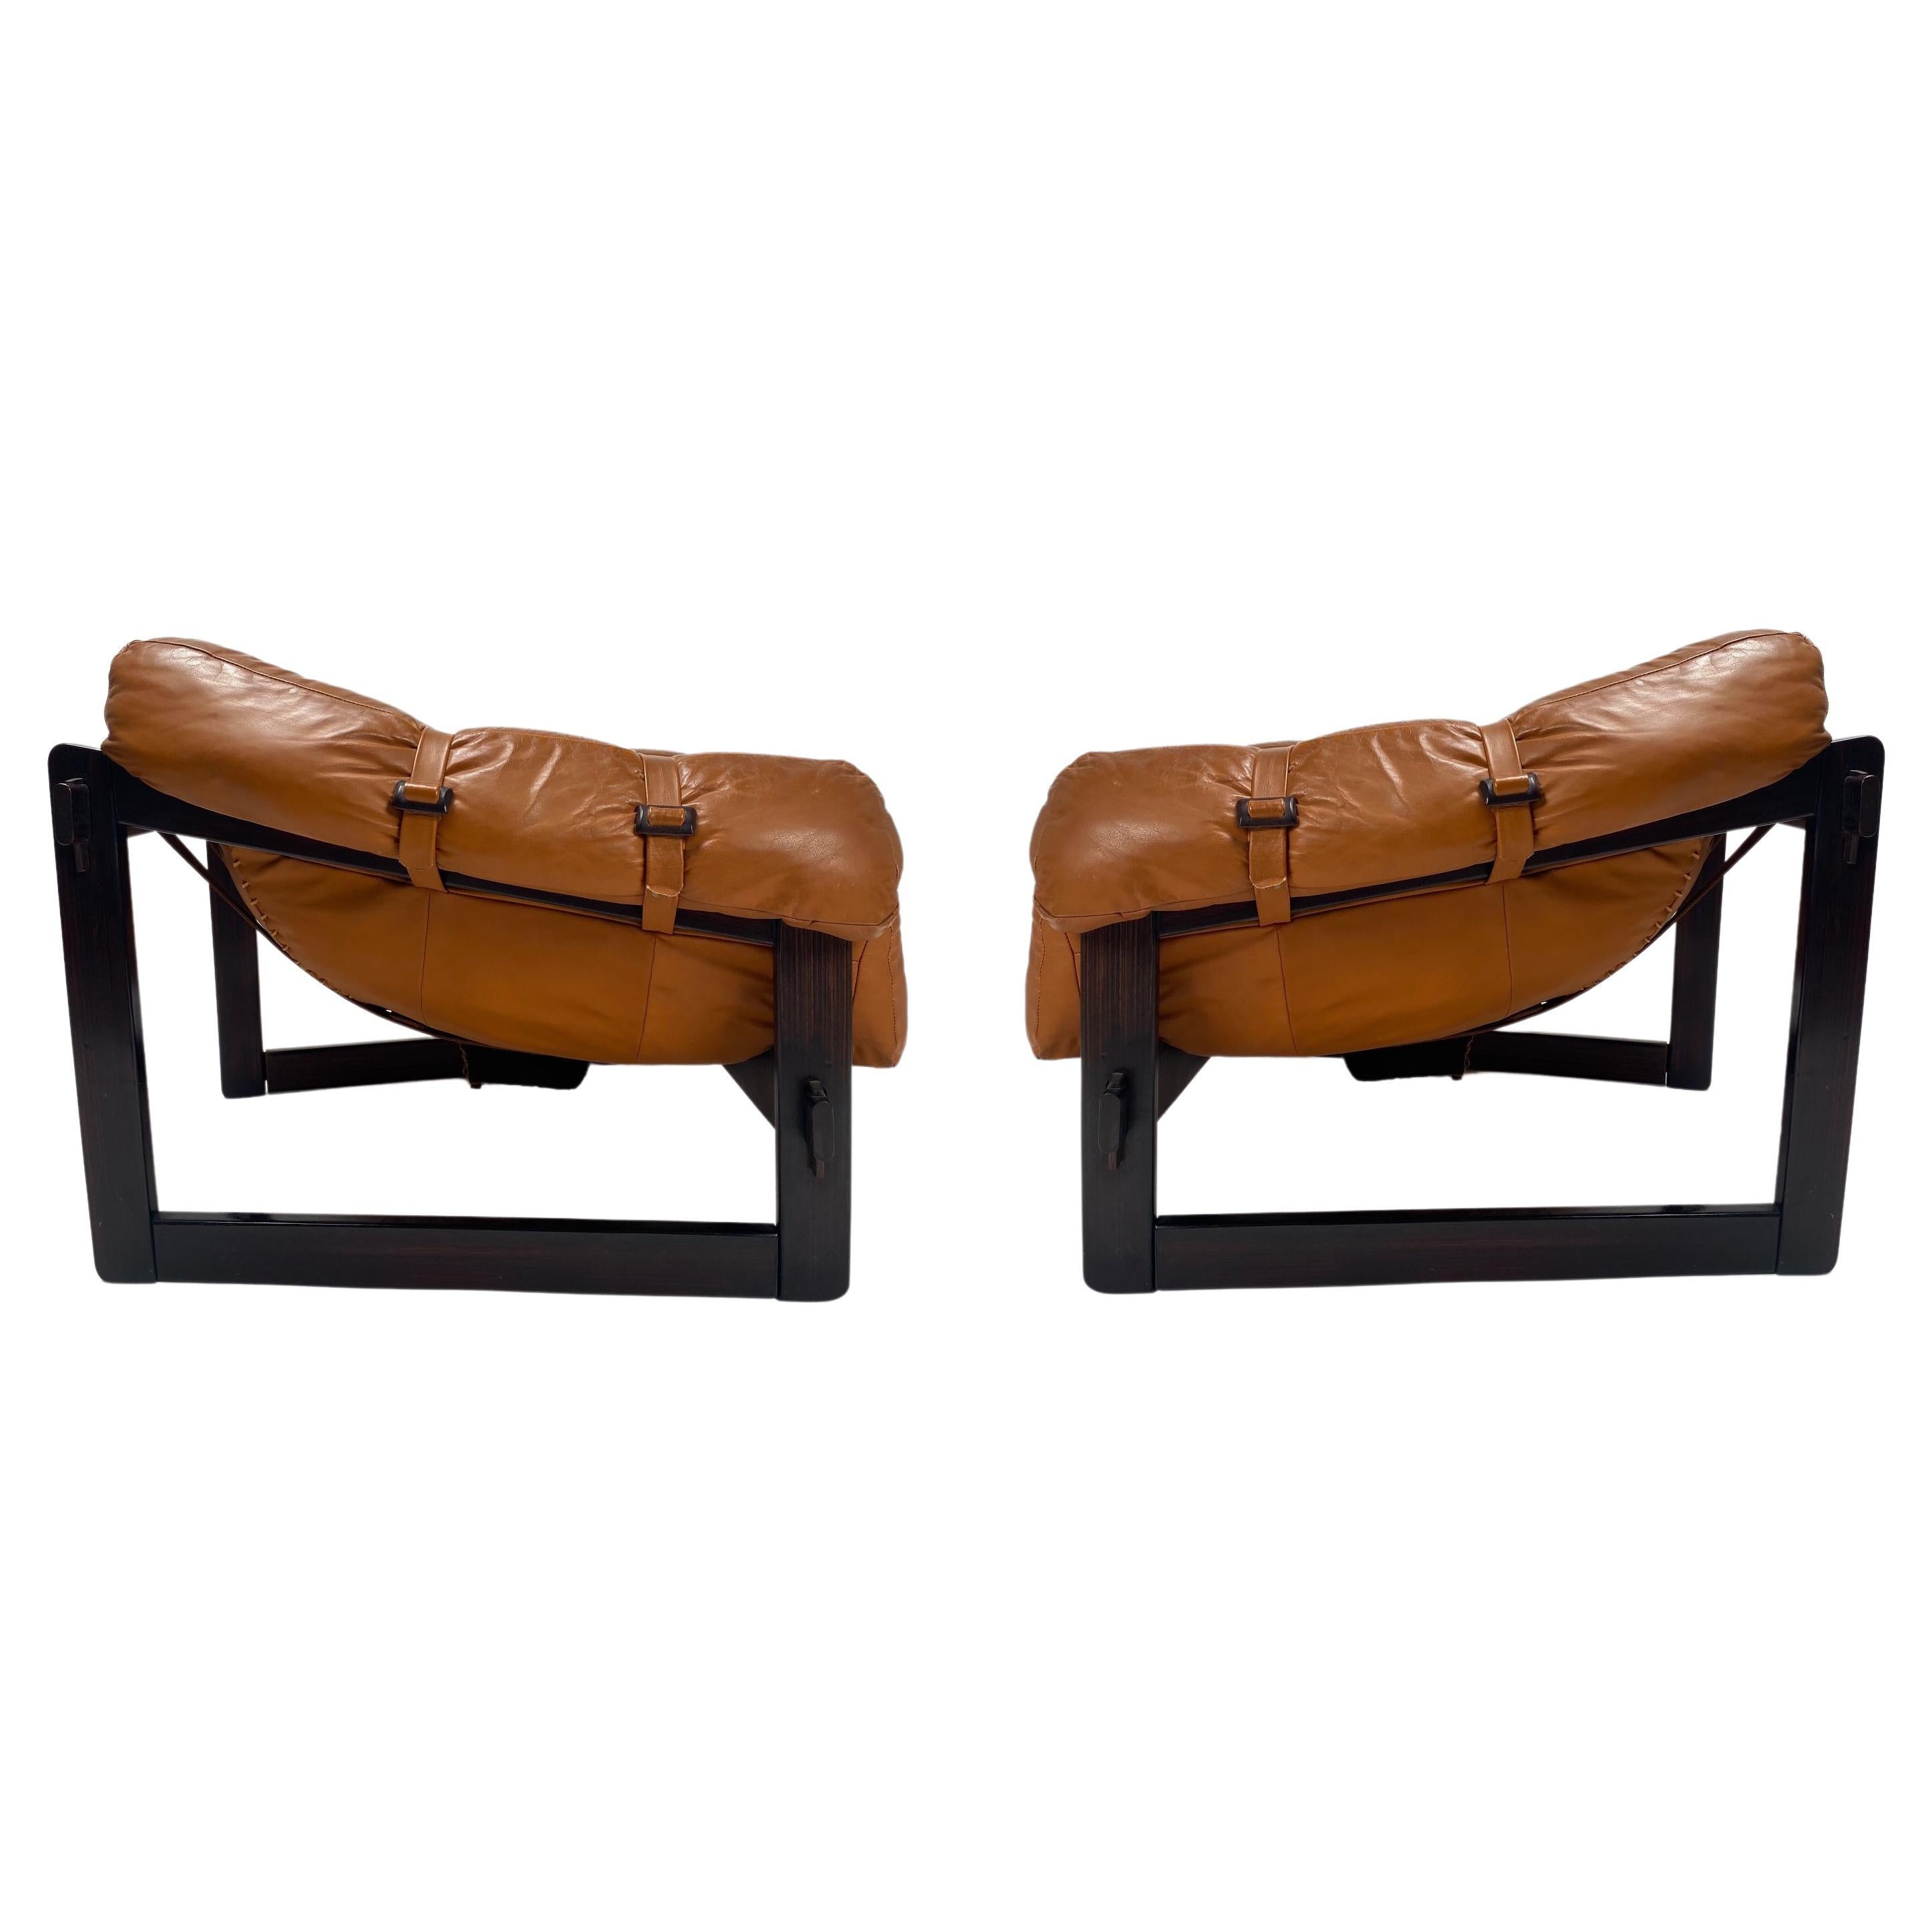 Set of 2 MP-091 Lounge Chairs by Percival Lafer, wood and leather, Brazil, 1960S